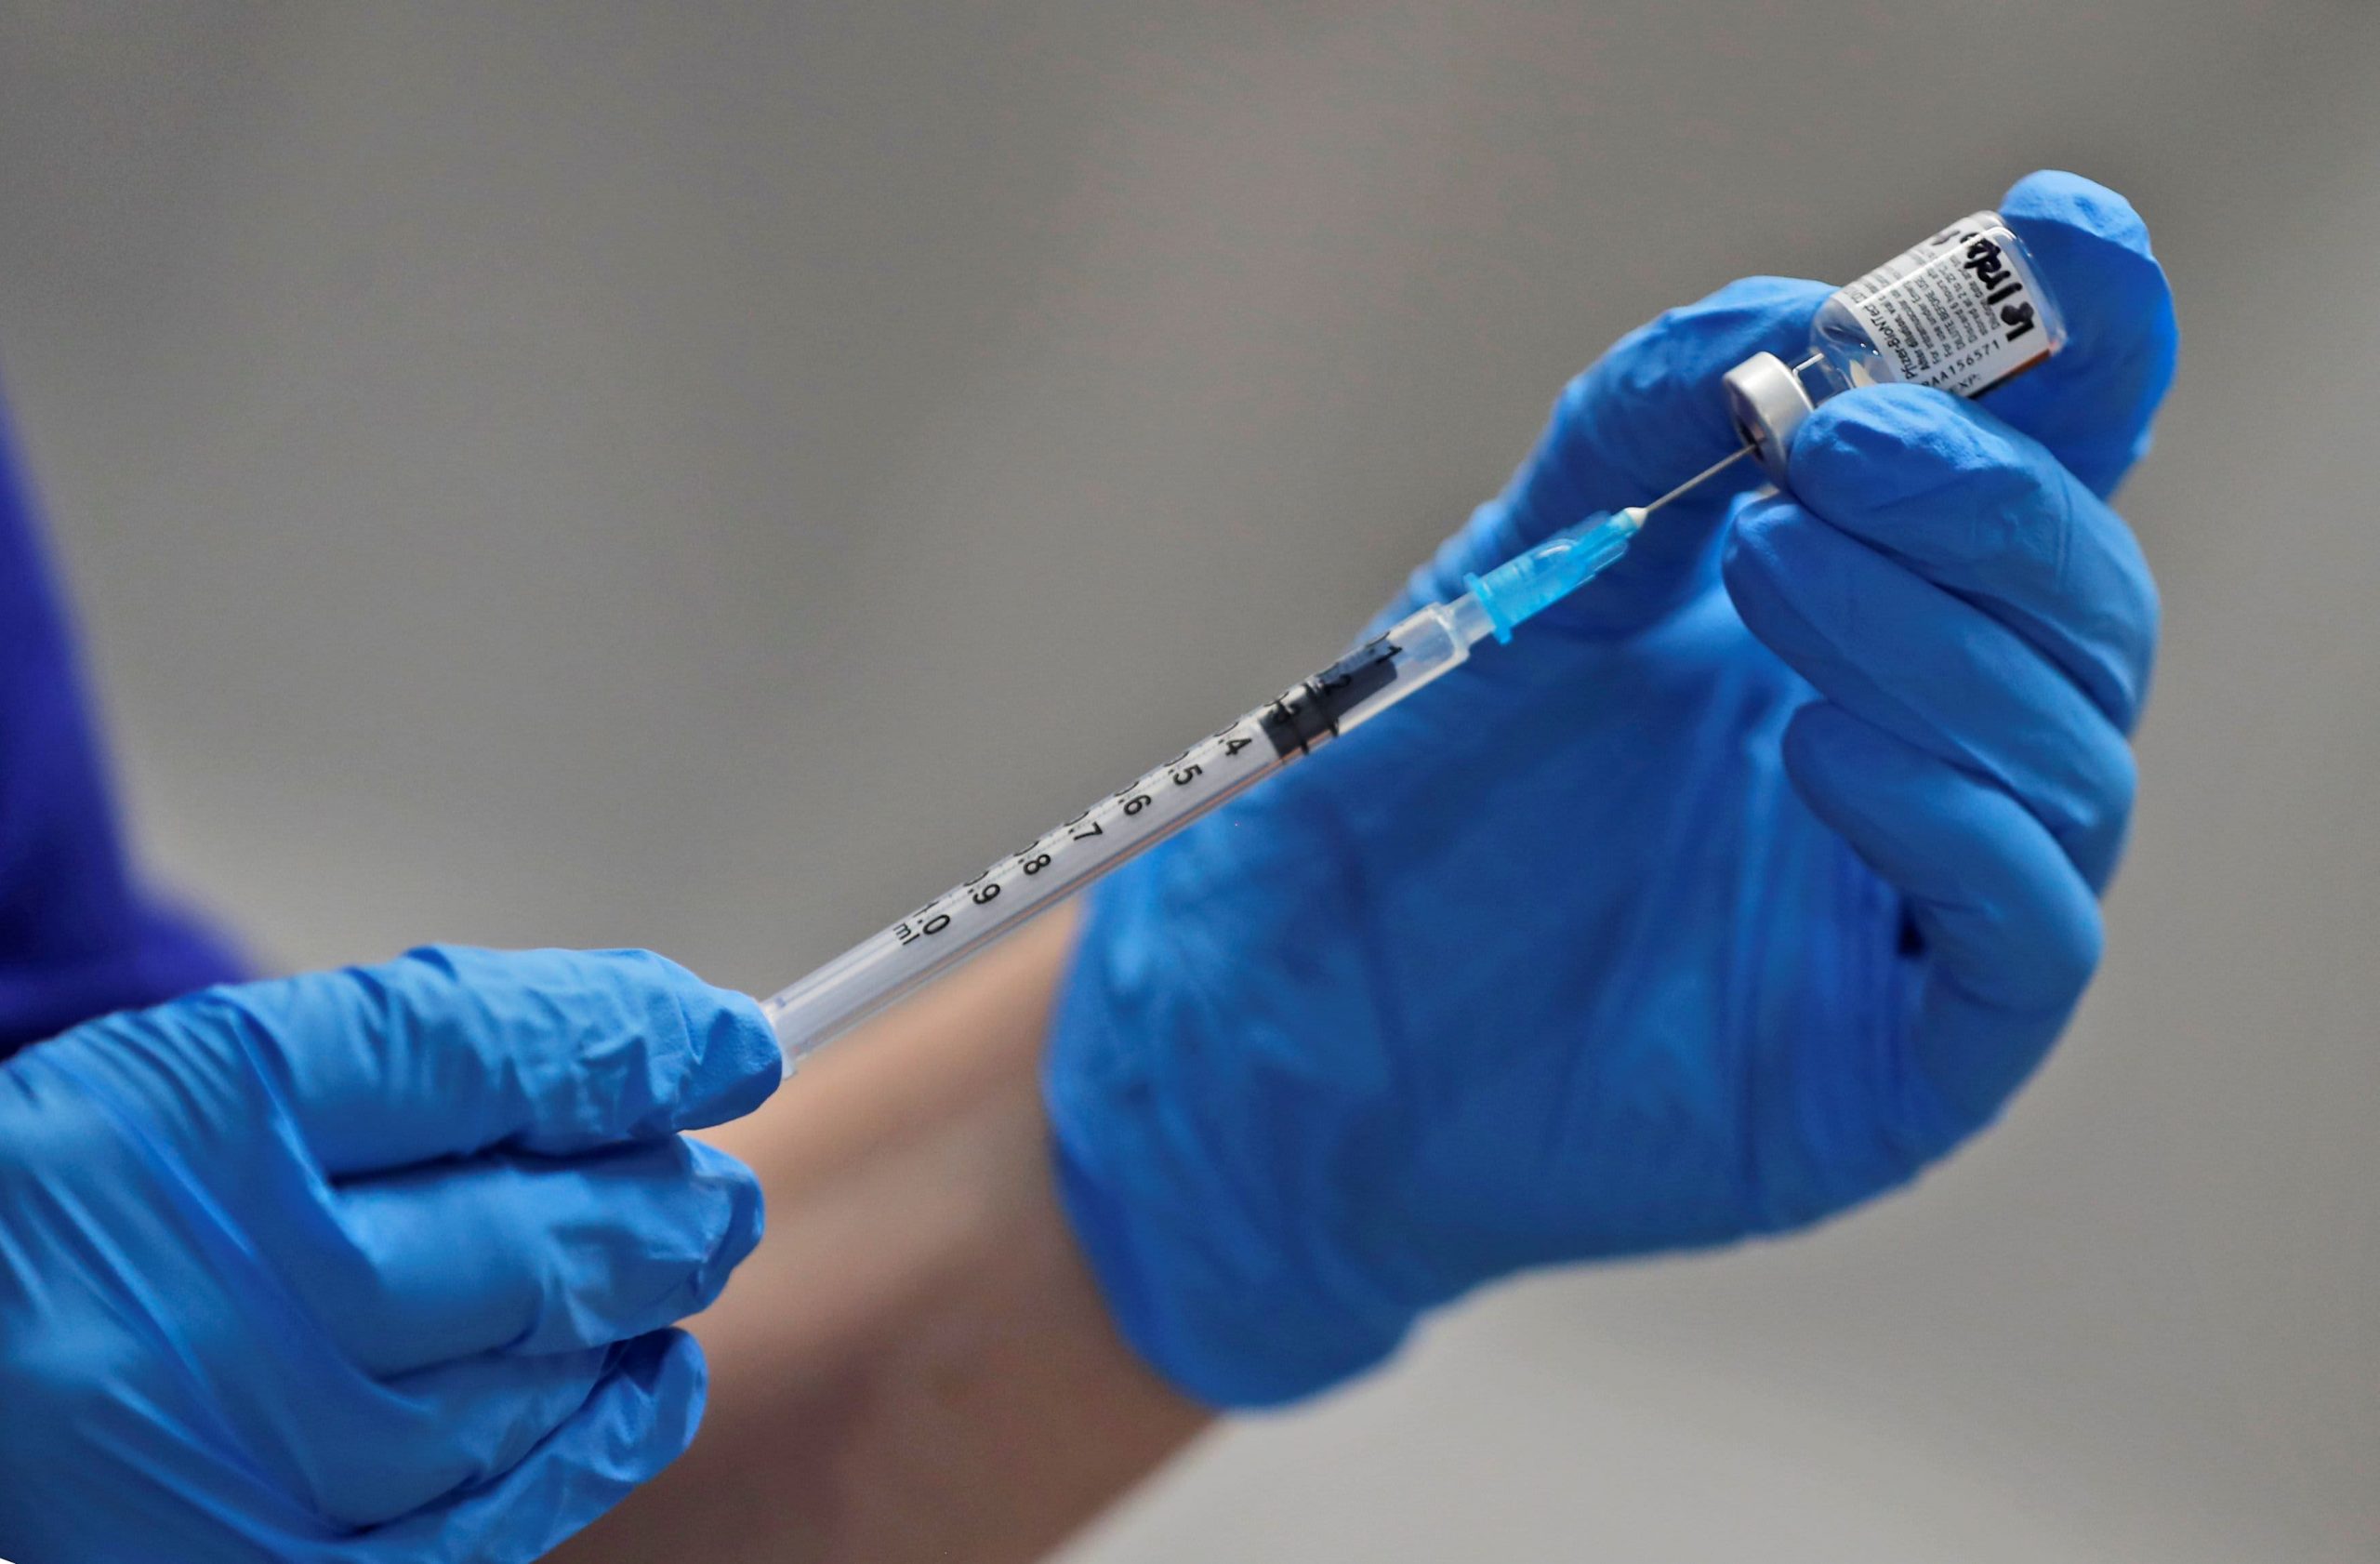 Pfizer Covid vaccine gives safety after first dose